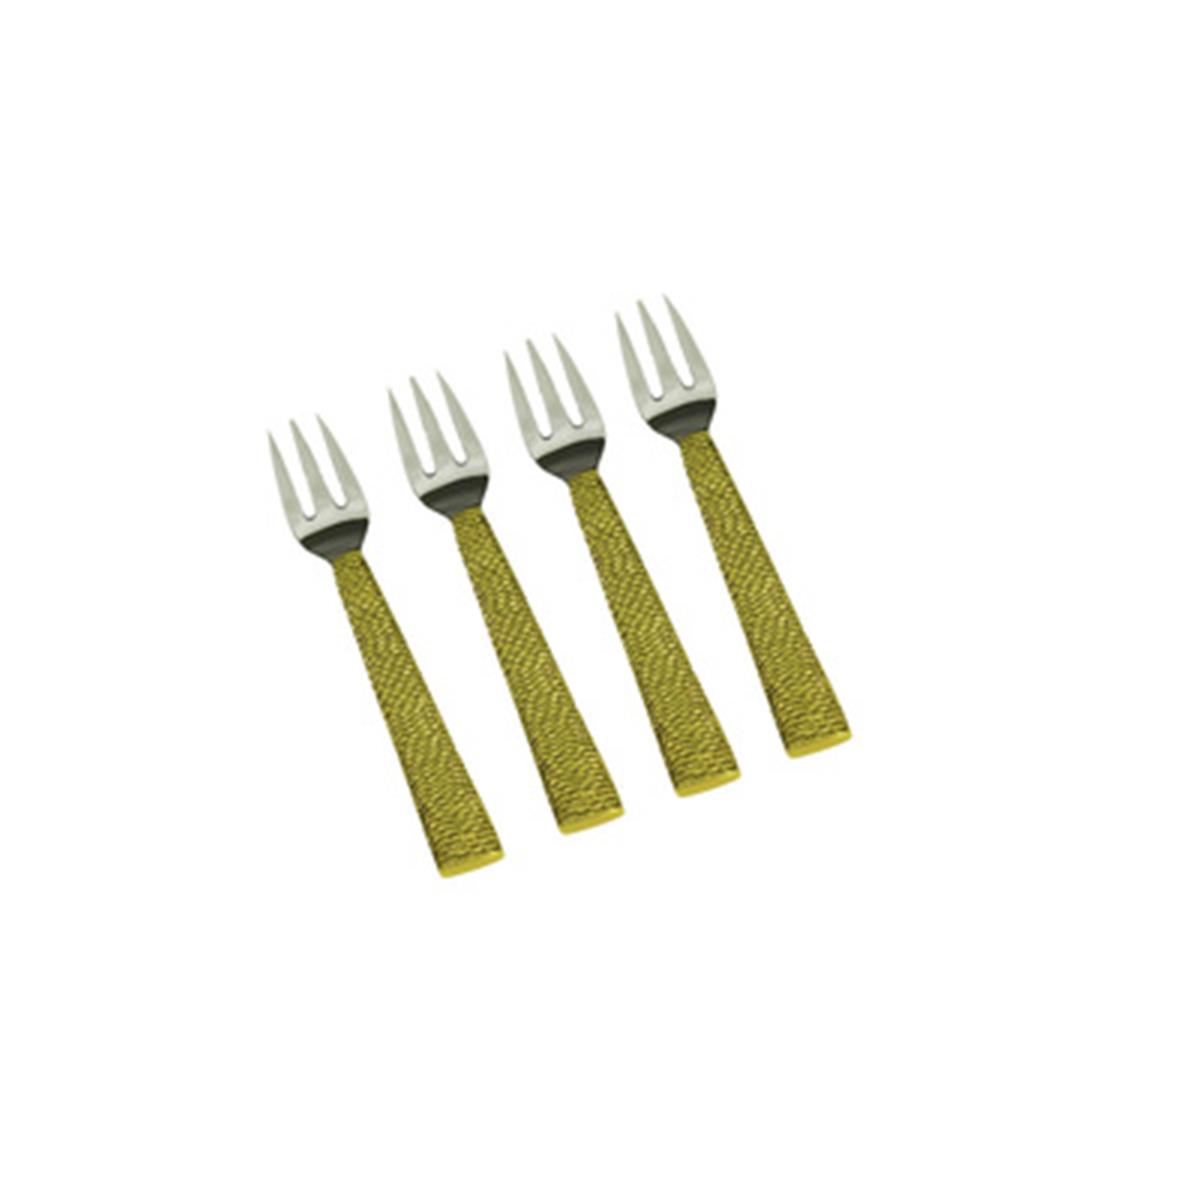 Classic Touch Spf22 5 In. Dessert Forks With Gold Handles - Set Of 4